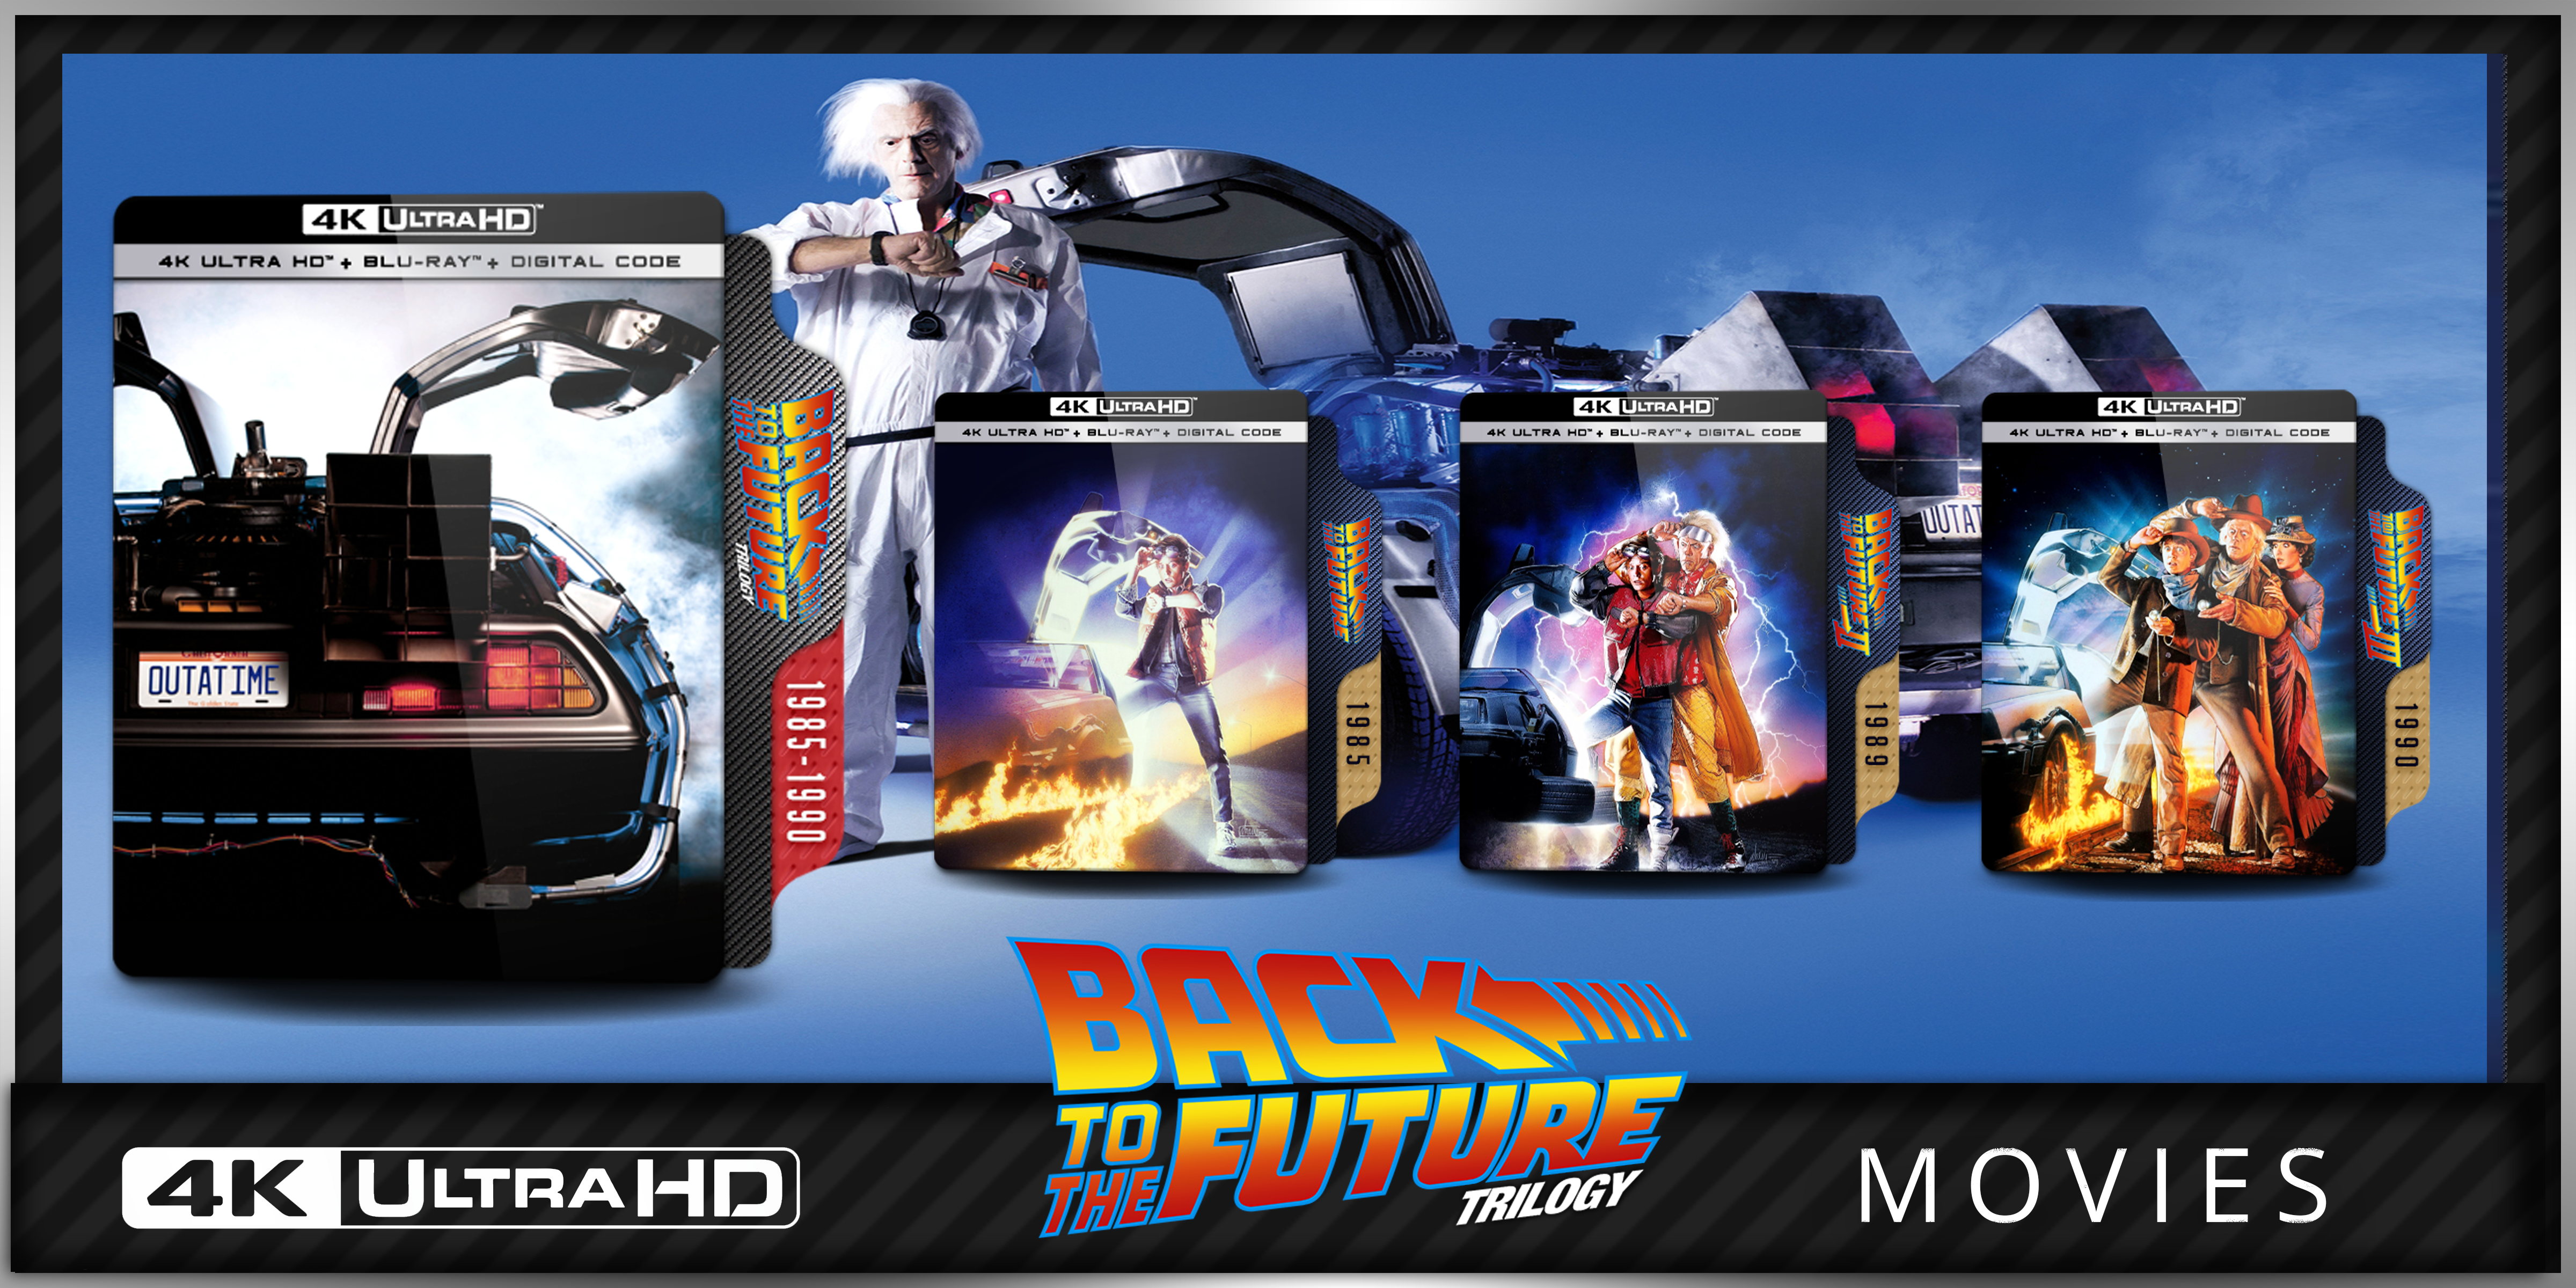 Back to the Future - Collection - 4K - 1985-1990 + by Carltje on DeviantArt